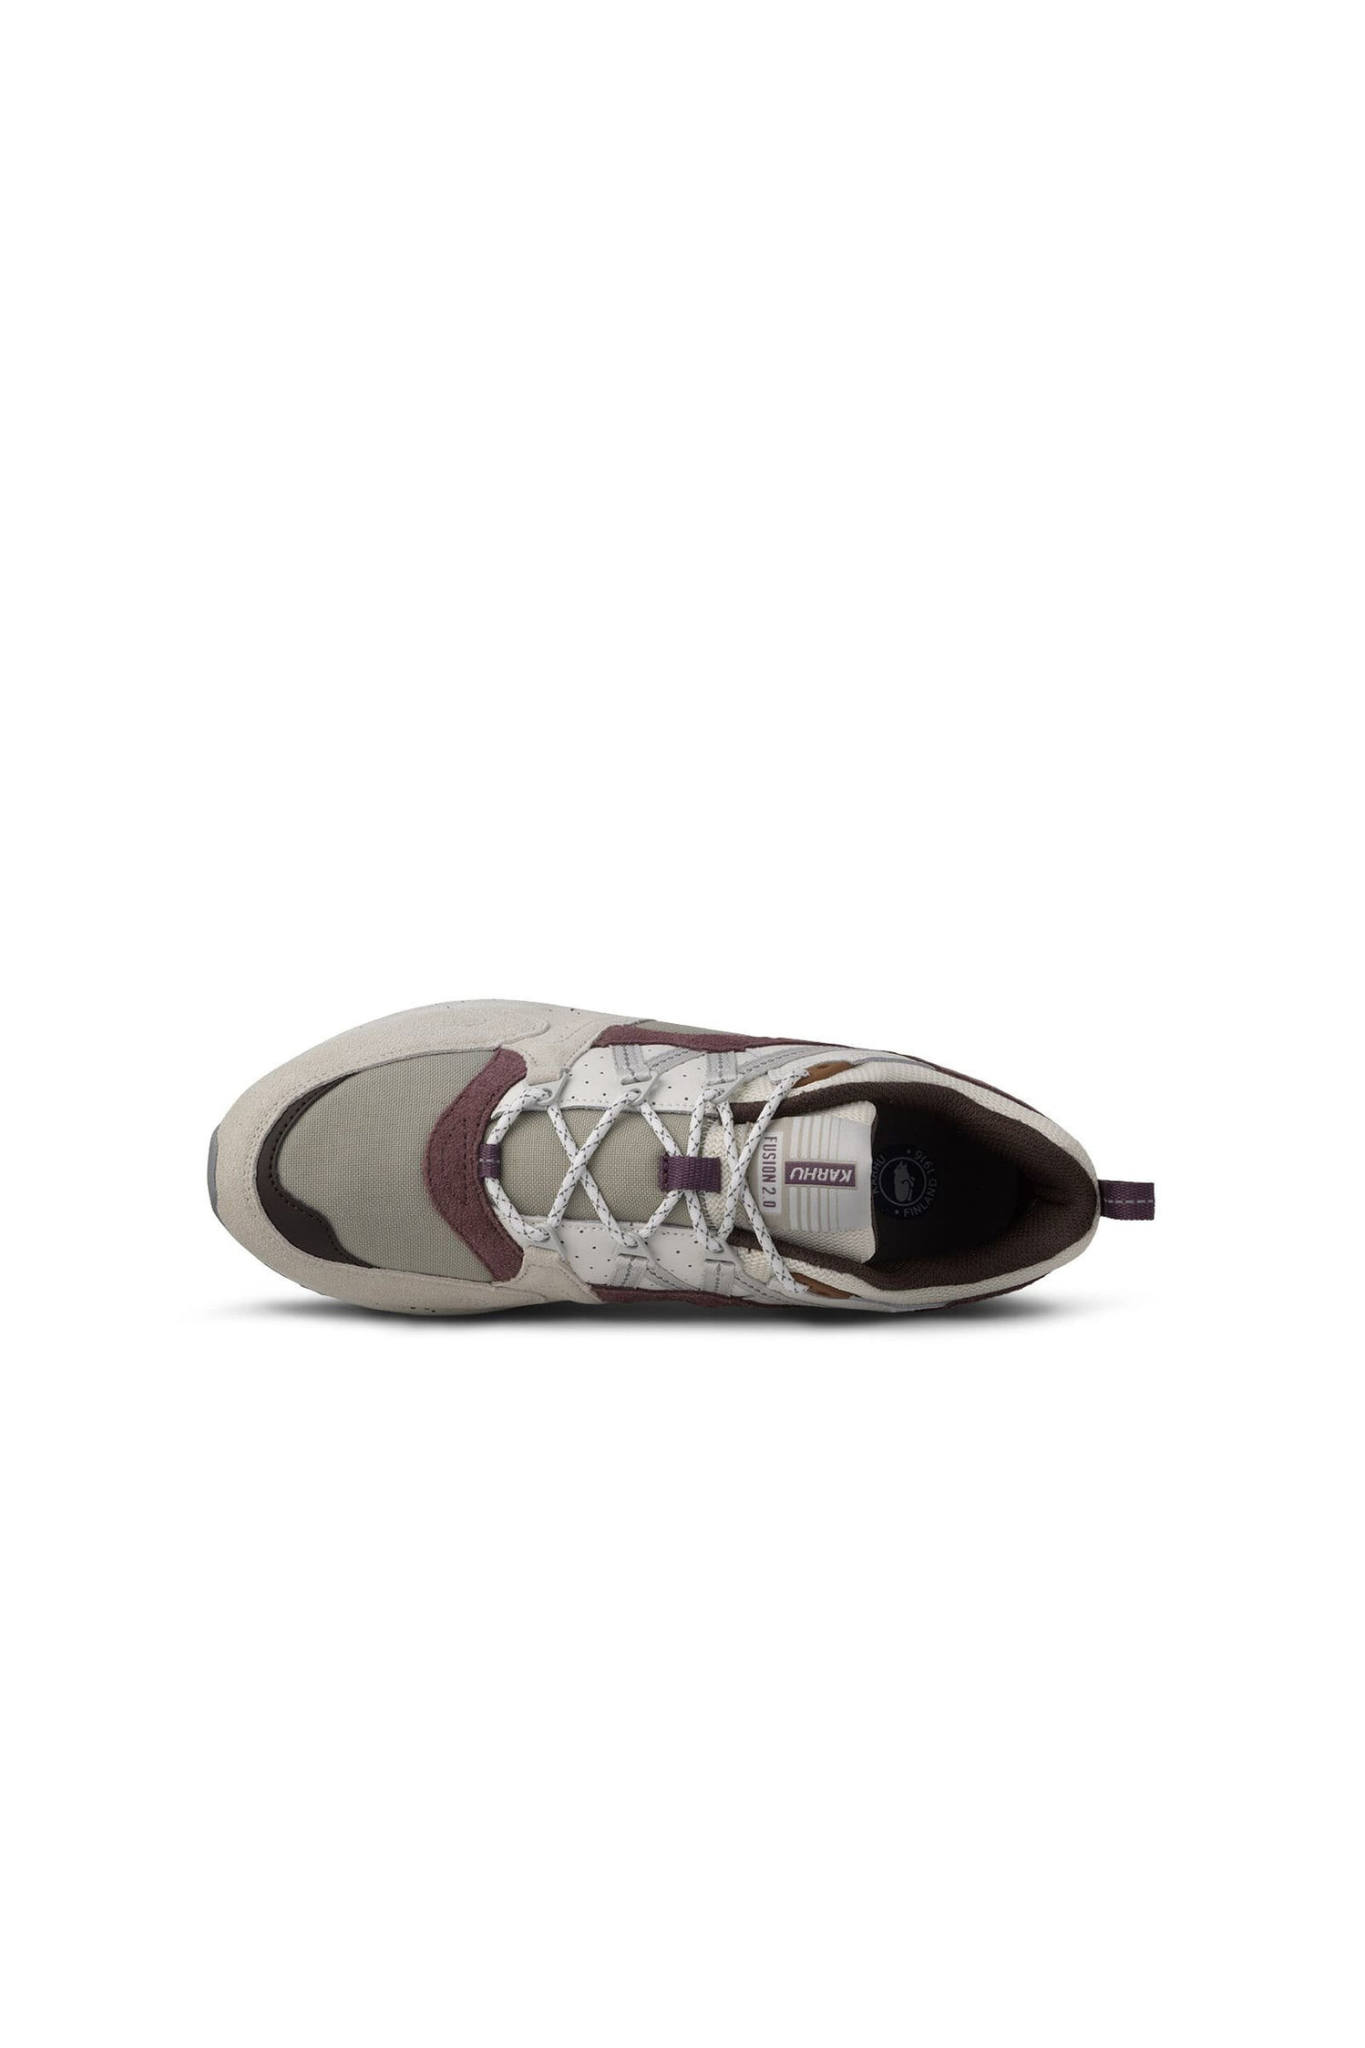 FUSION 2.0 WOMEN SNEAKERS - FOGGY DEW/MOONSCAPE